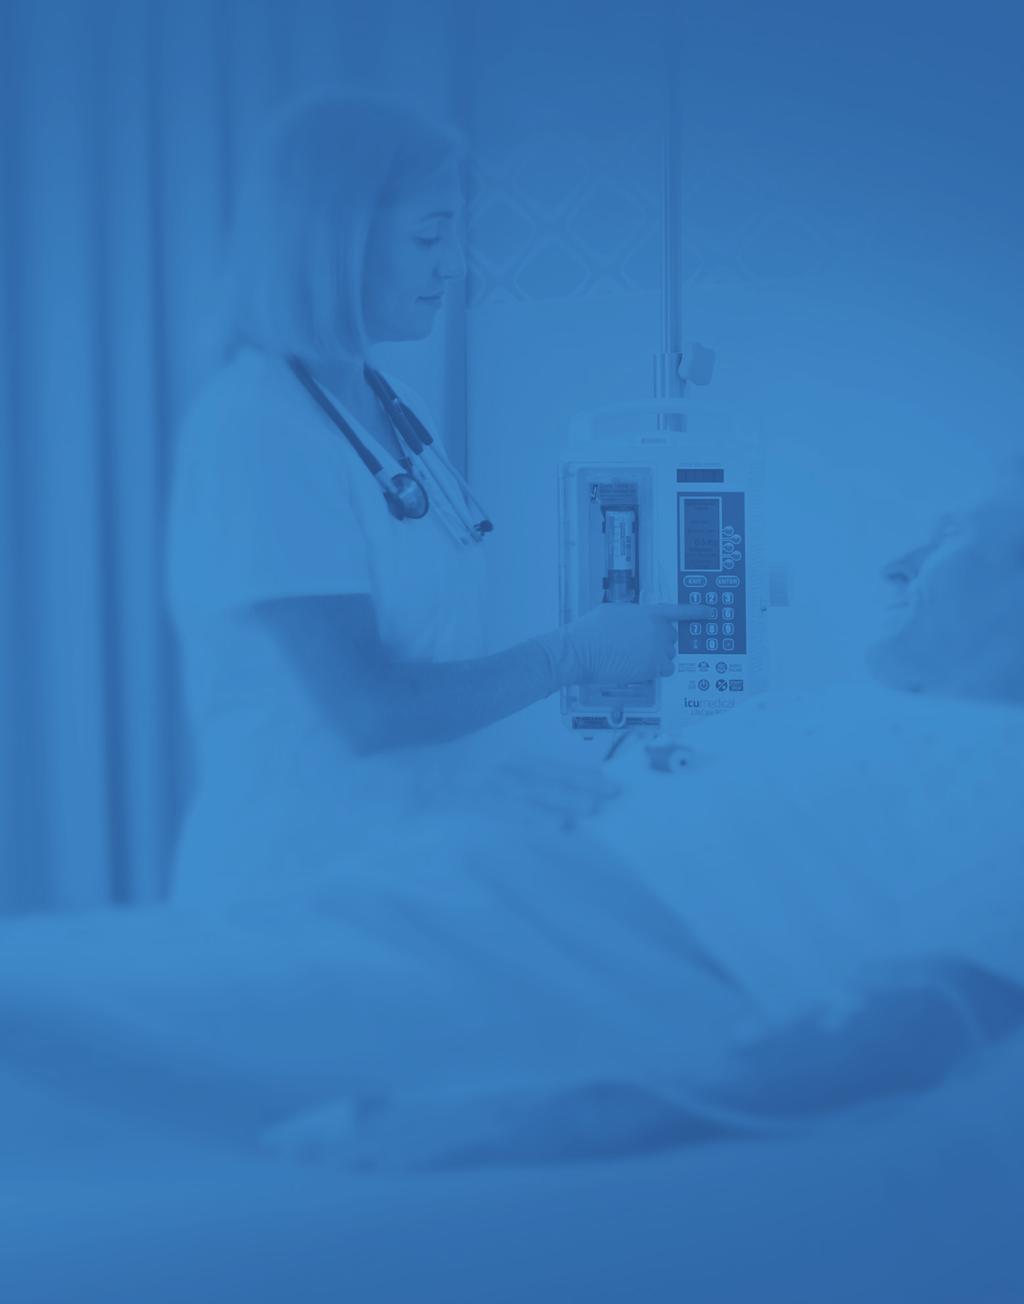 Completely Focused on Improving the Safety and Efficiency of IV Medication Delivery We know your choice of infusion systems represents a long-term investment in delivering safety to your patients and